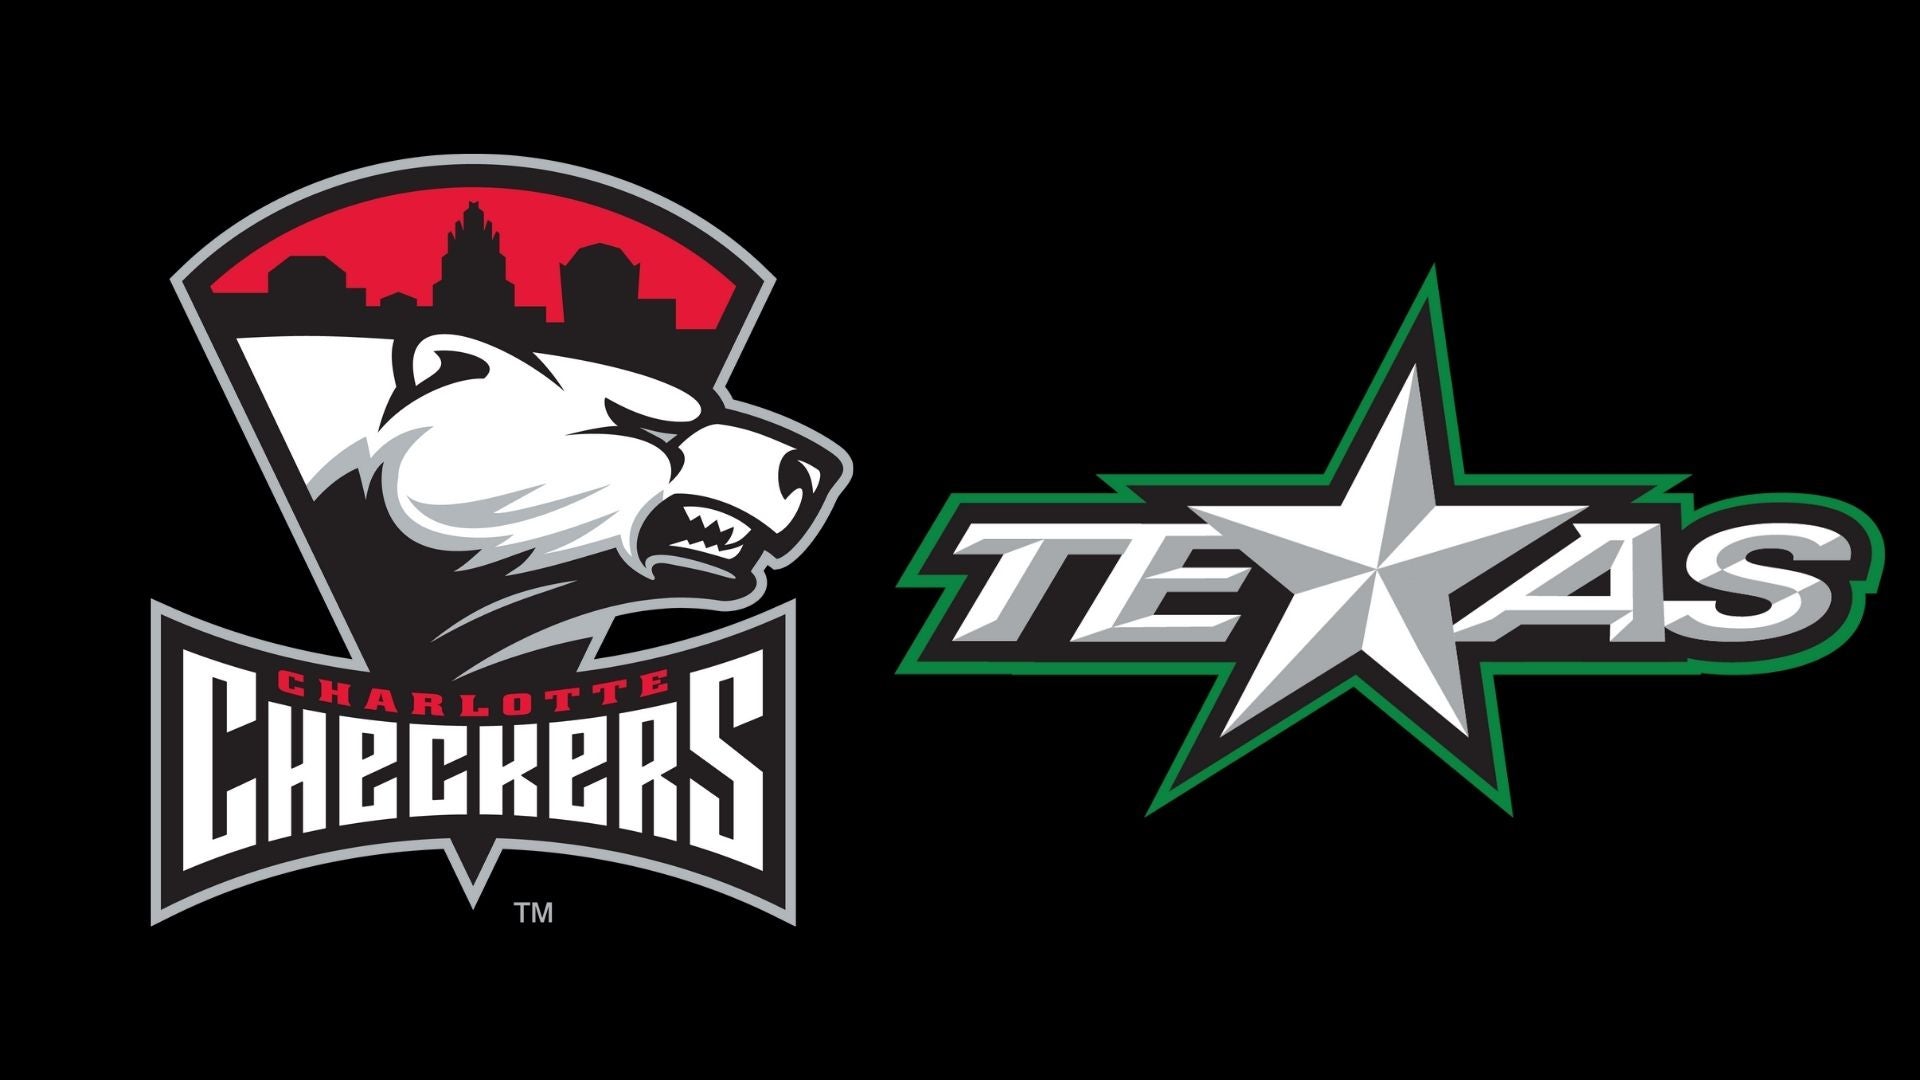 Stars Hangar on X: It's Playoff Time in Texas!! Retweet and tell us what  you are most looking forward to in the Stars vs Preds series to be entered  to win a “